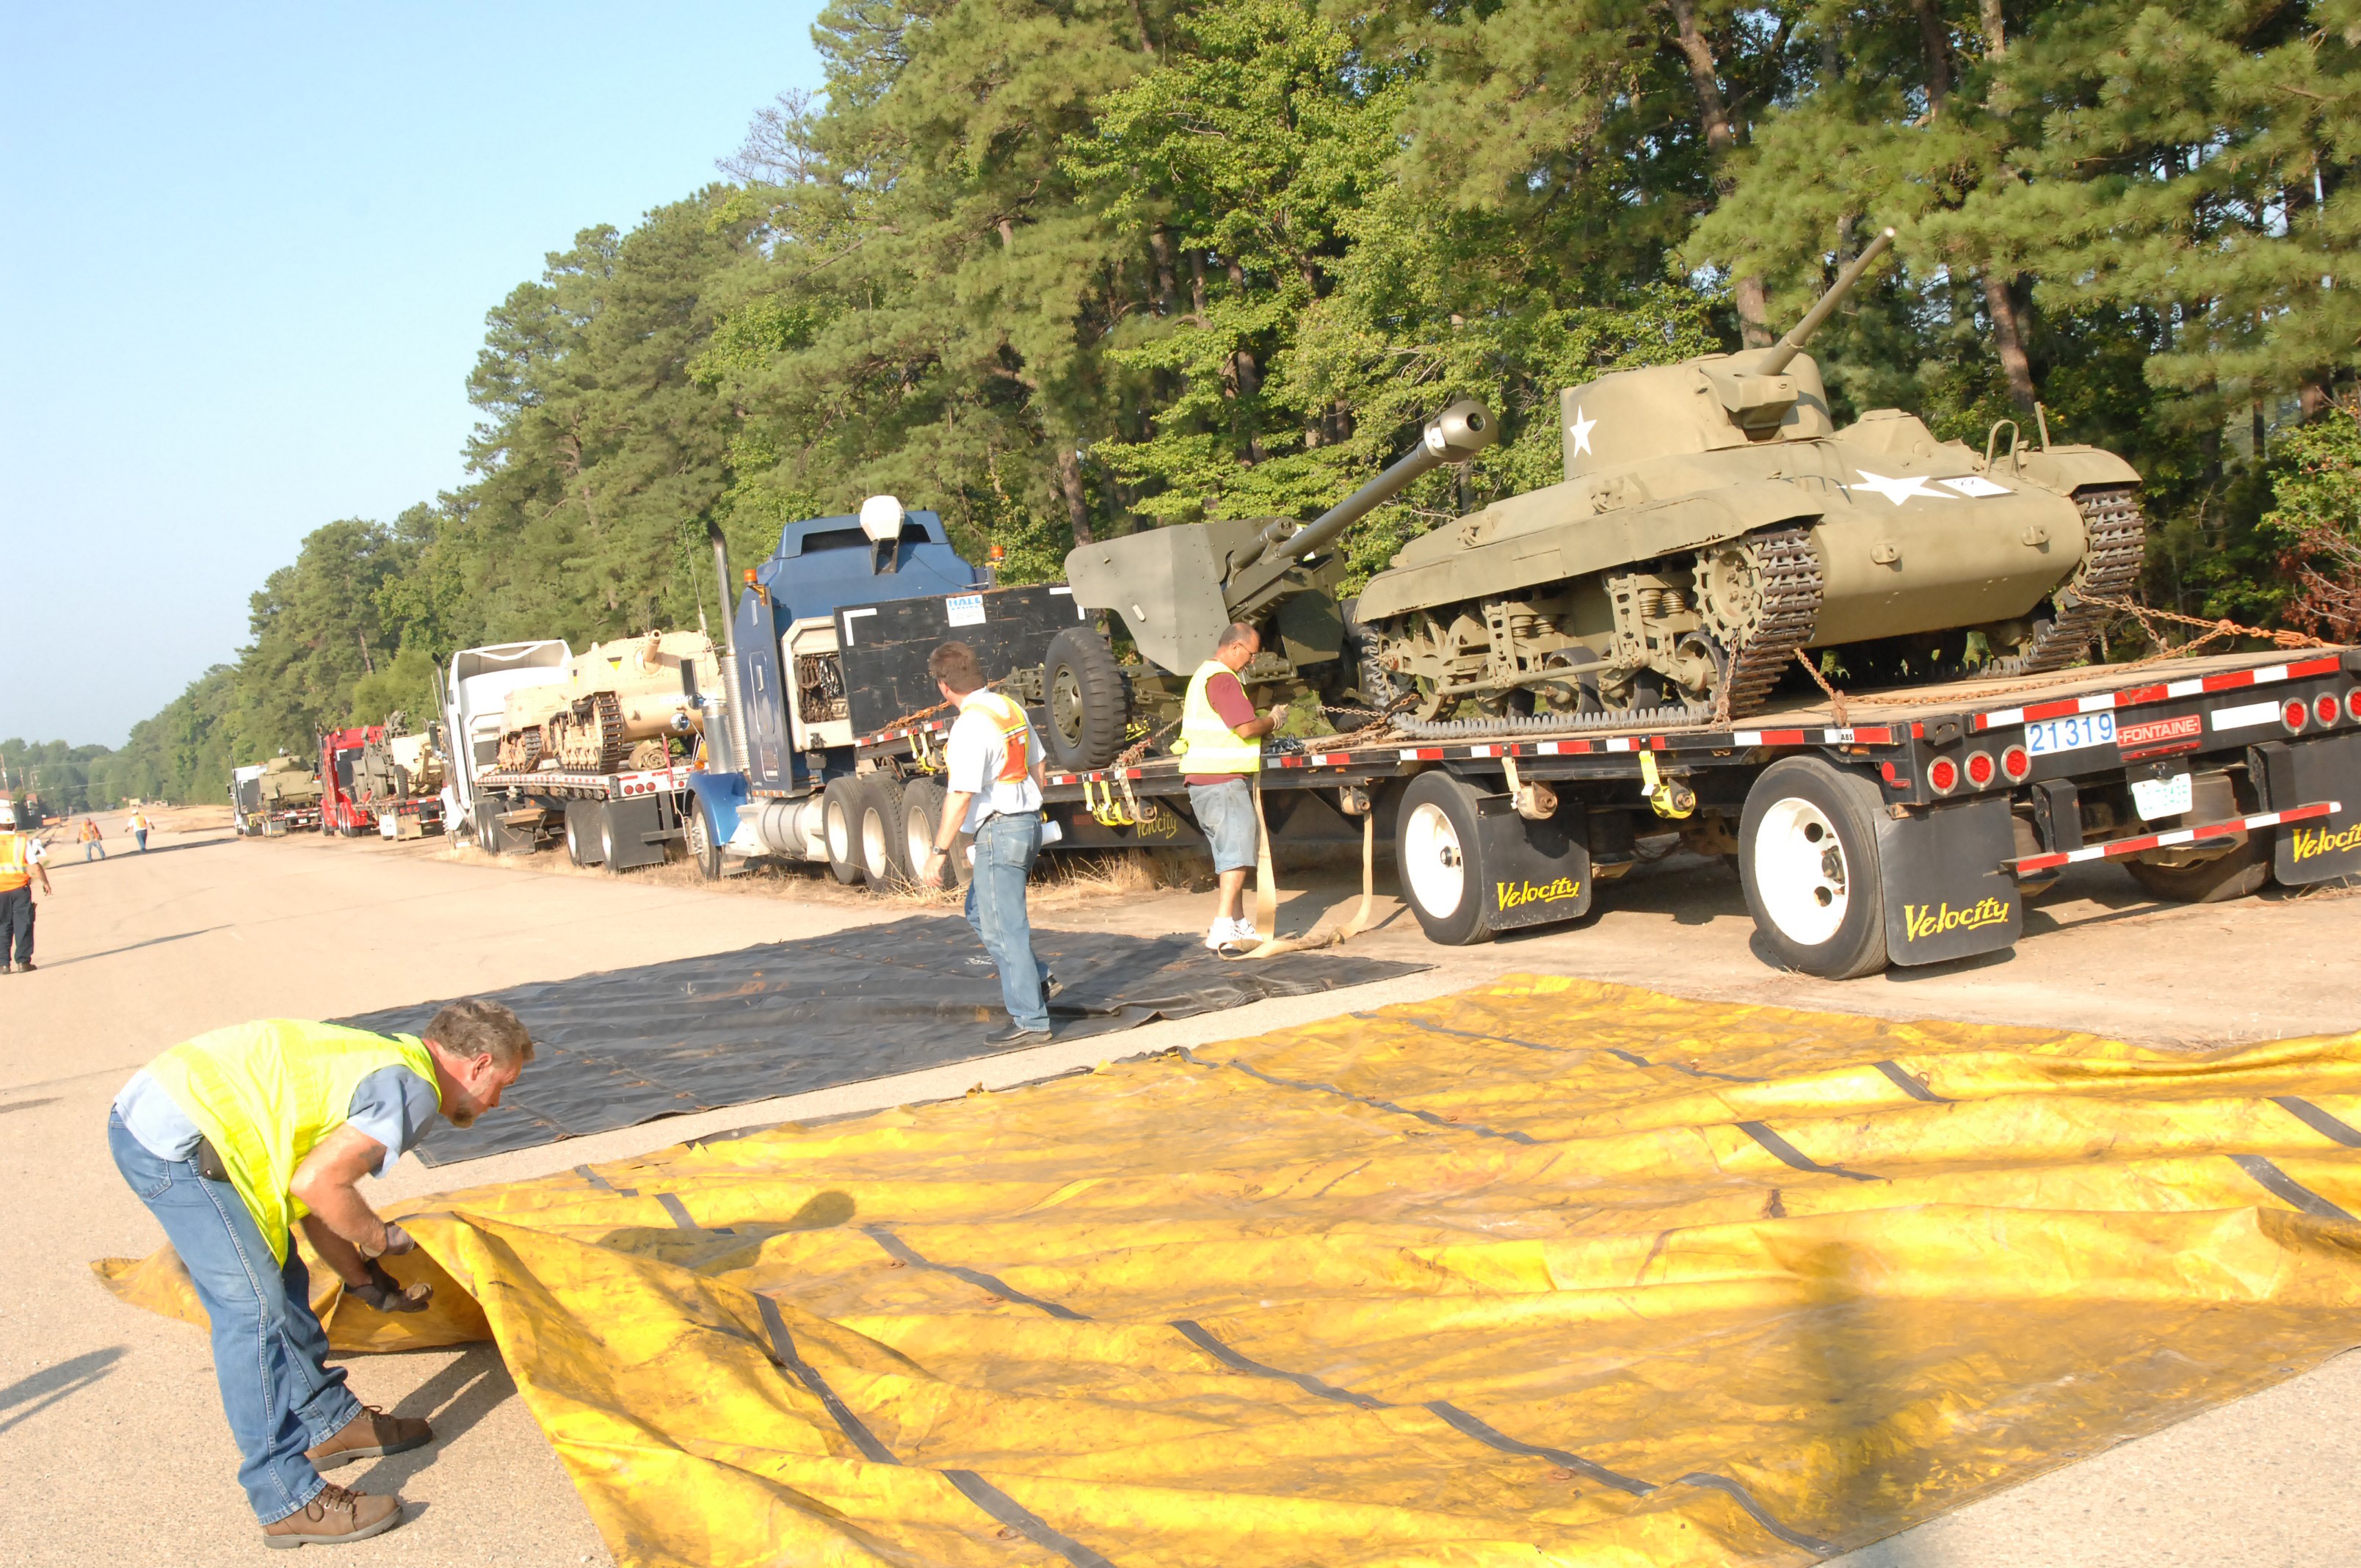 Ordnance tanks, artillery arrive at Fort Lee | Article | The United States  Army